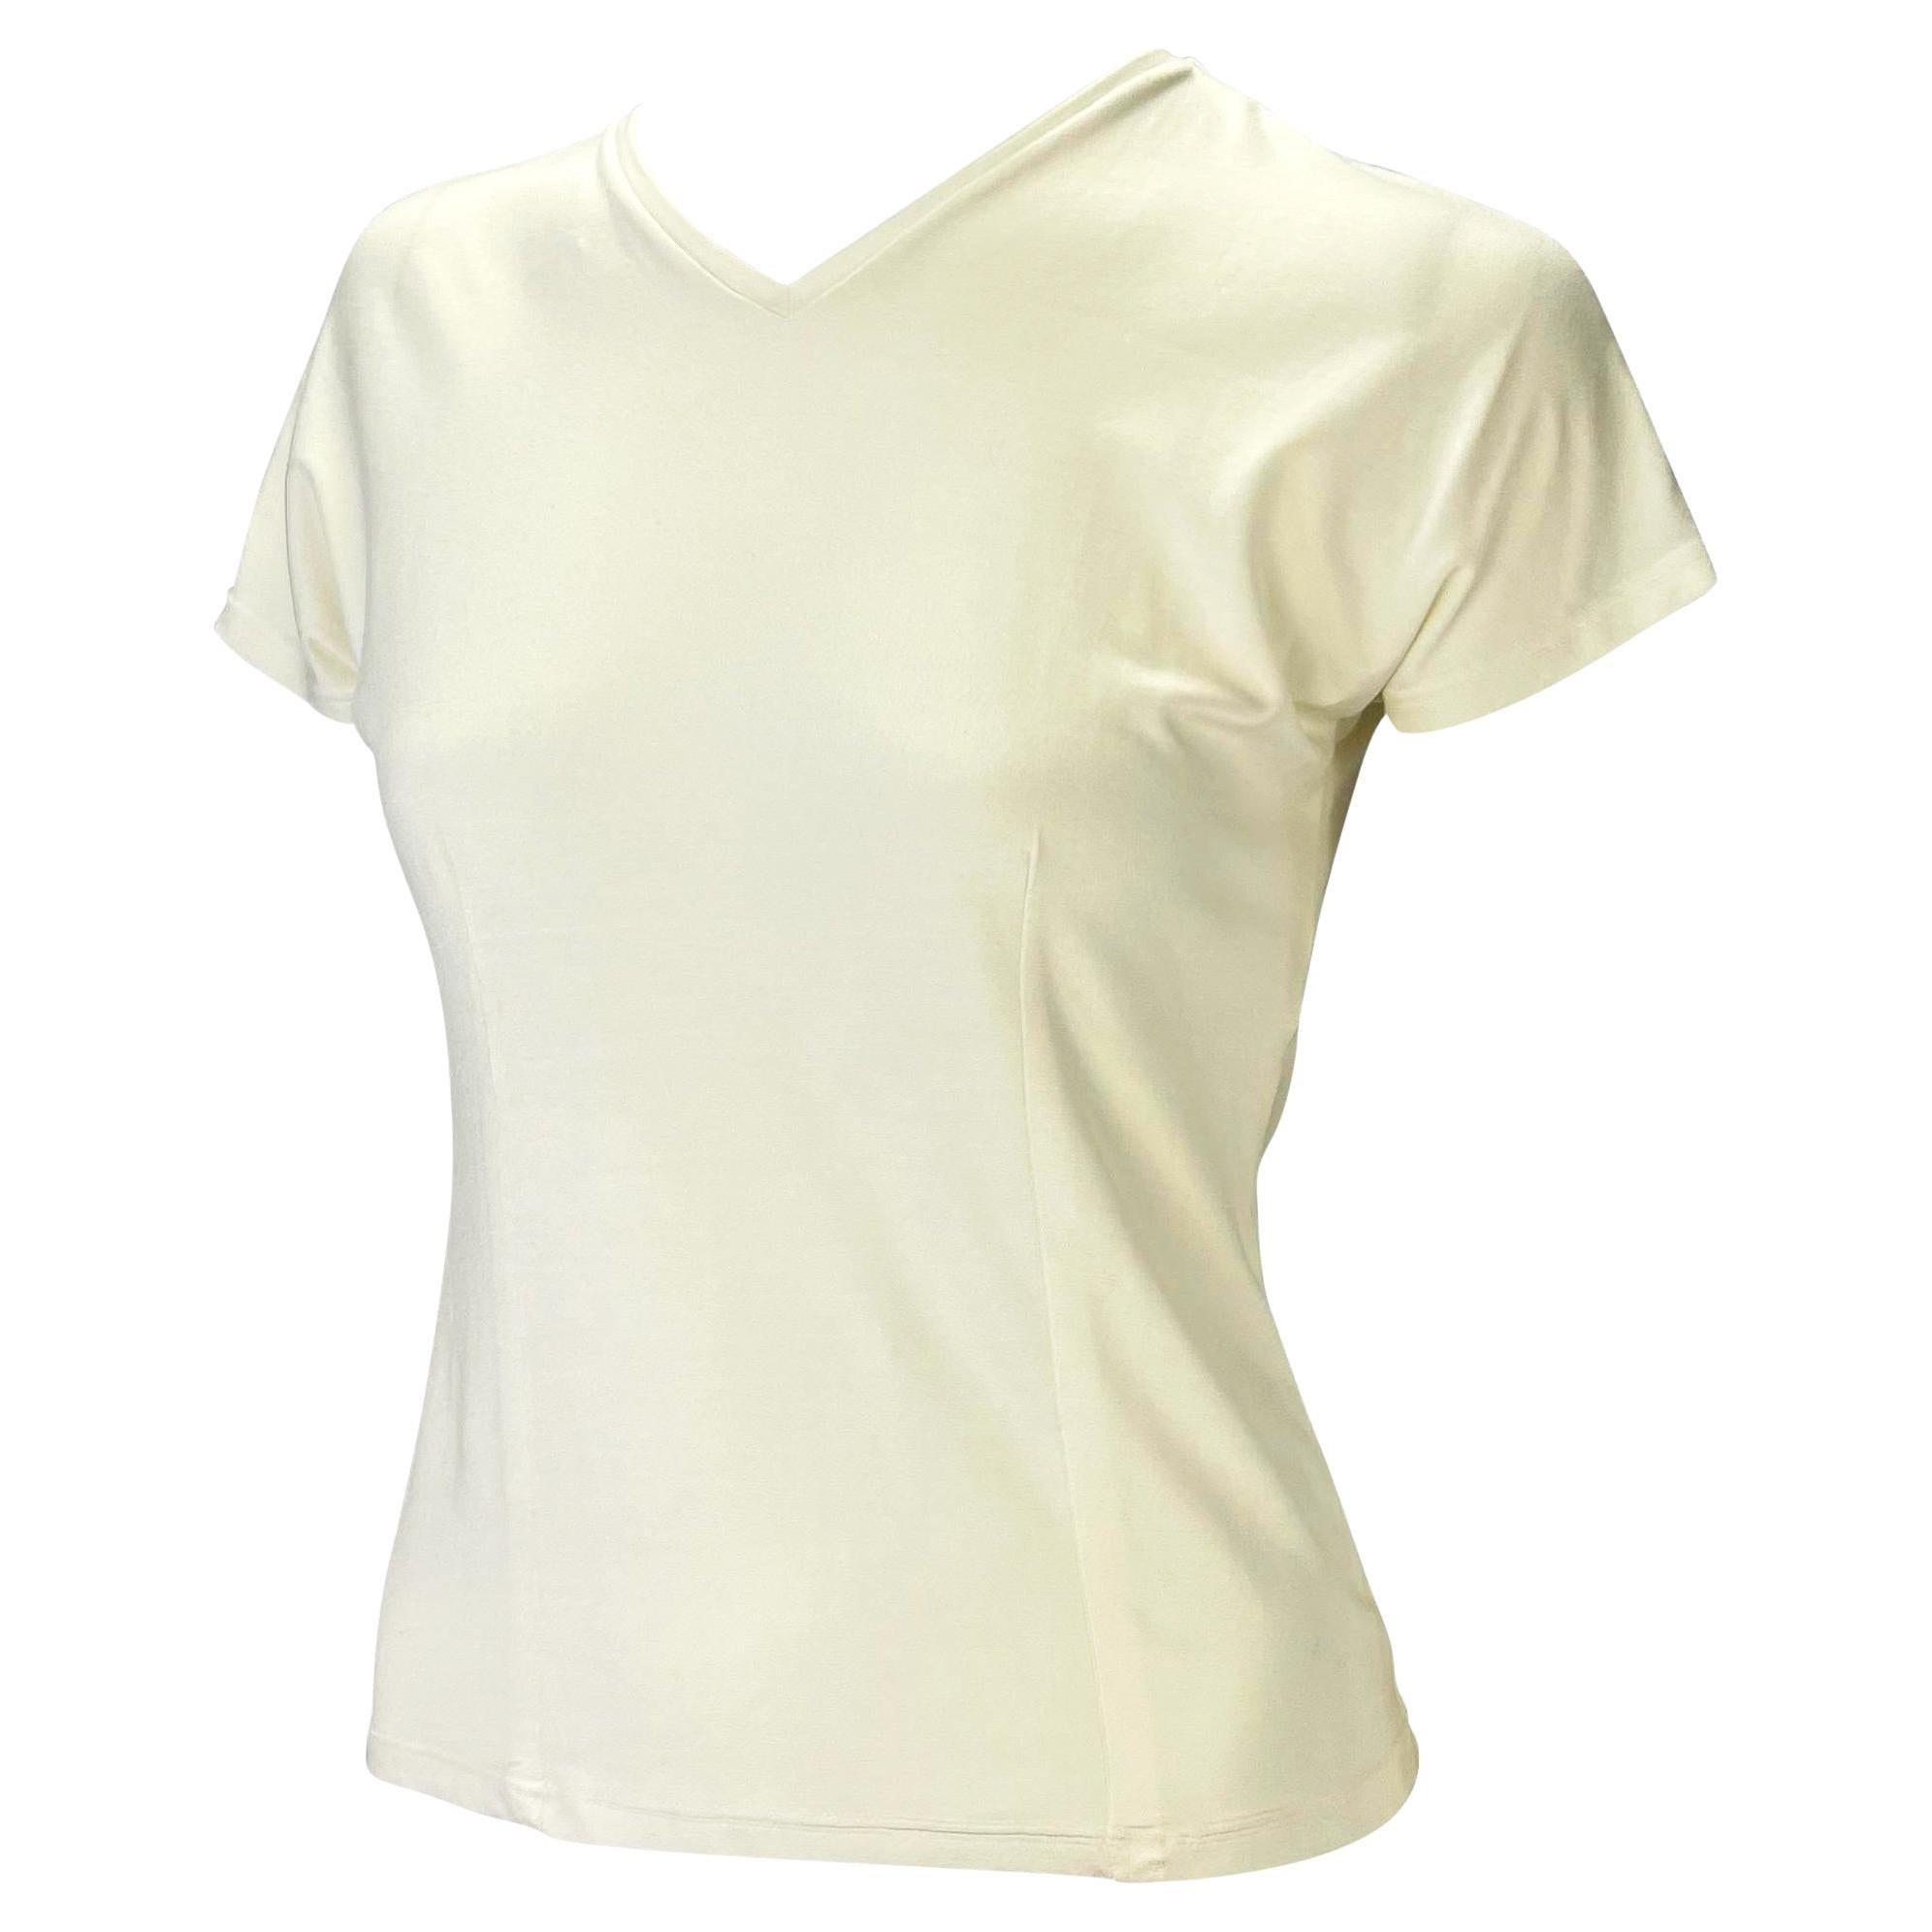 Presenting a minimal v-neck t-shirt designed by Tom Ford for Gucci's Spring/Summer 1997 collection. Tapered at the waist to create a cinched silhouette, the viscose and spandex blend allow the shirt to perfectly hug the body. Add this subtle Tom